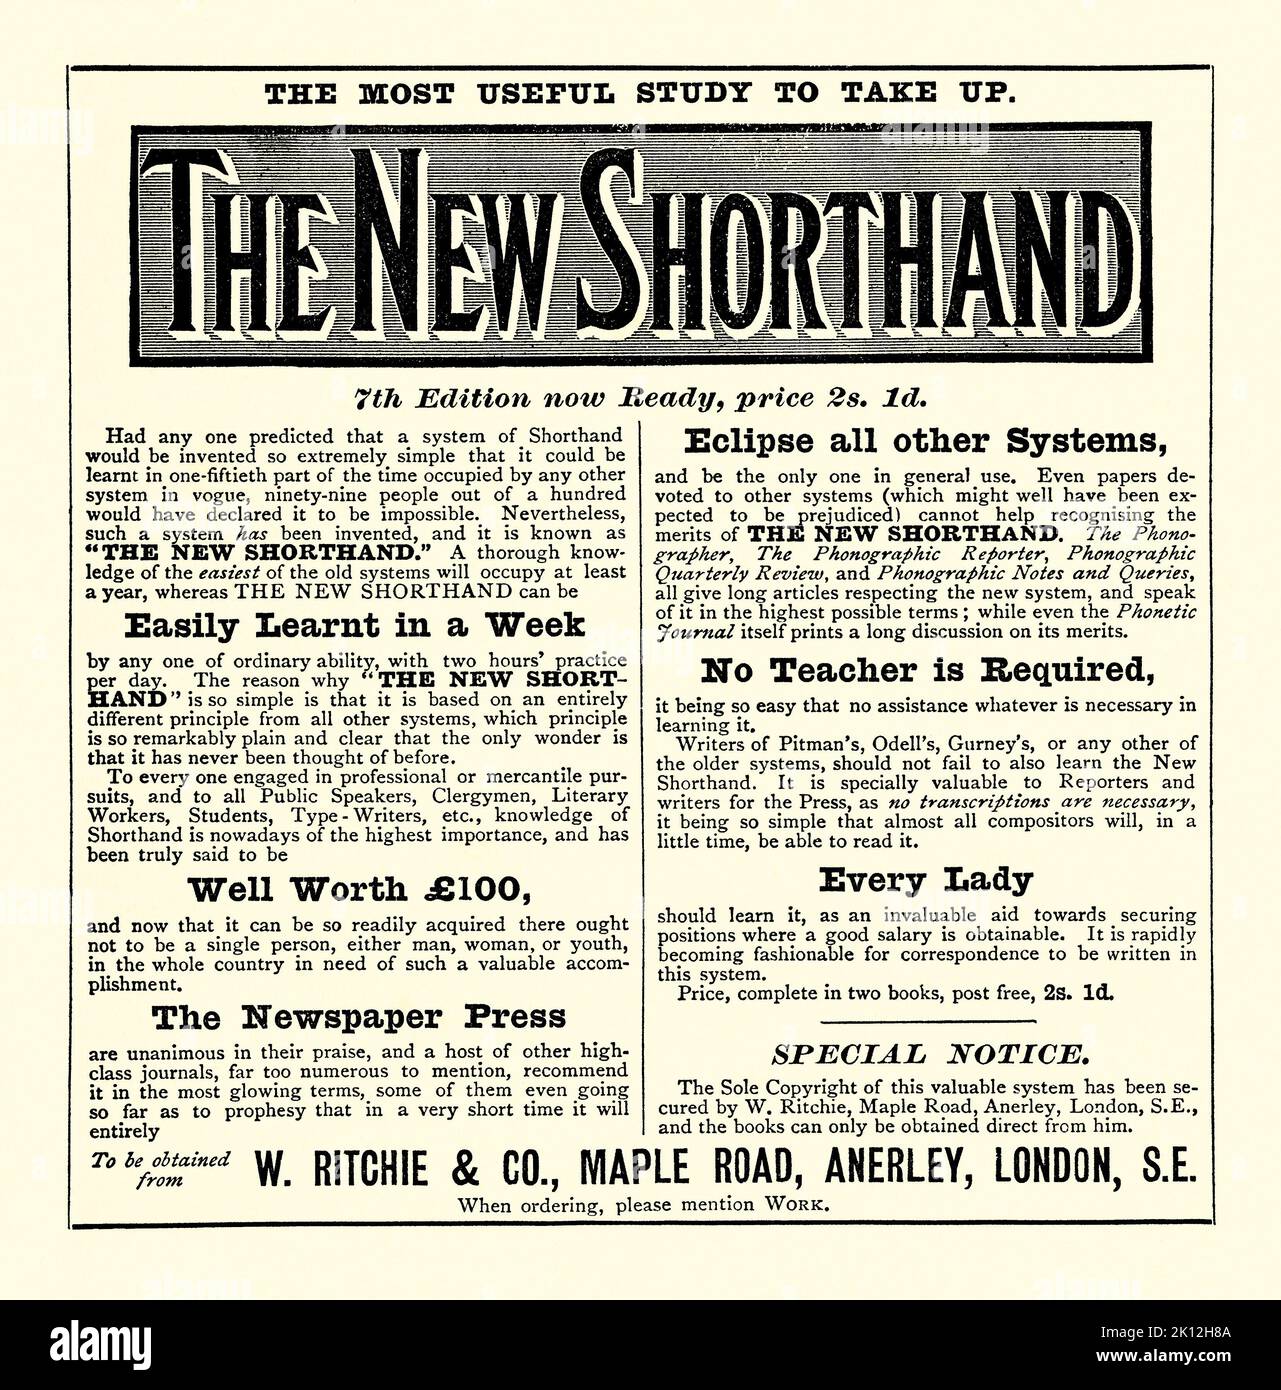 An old Victorian advert for ‘The New Shorthand’, a system made by W Ritchie and Co of Anerley, London, England, UK. It is from a magazine of 1890. The new, easily-learnt technique is claimed to be superior to older systems such as those by Pitman, Odell and Gurney. Shorthand is an abbreviated symbolic writing method that increases speed and brevity of writing as compared to longhand. The process of writing in shorthand is also called phonography or stenography. A typical shorthand system provides symbols or abbreviations for words and common phrases – old 1800s graphics. Stock Photo